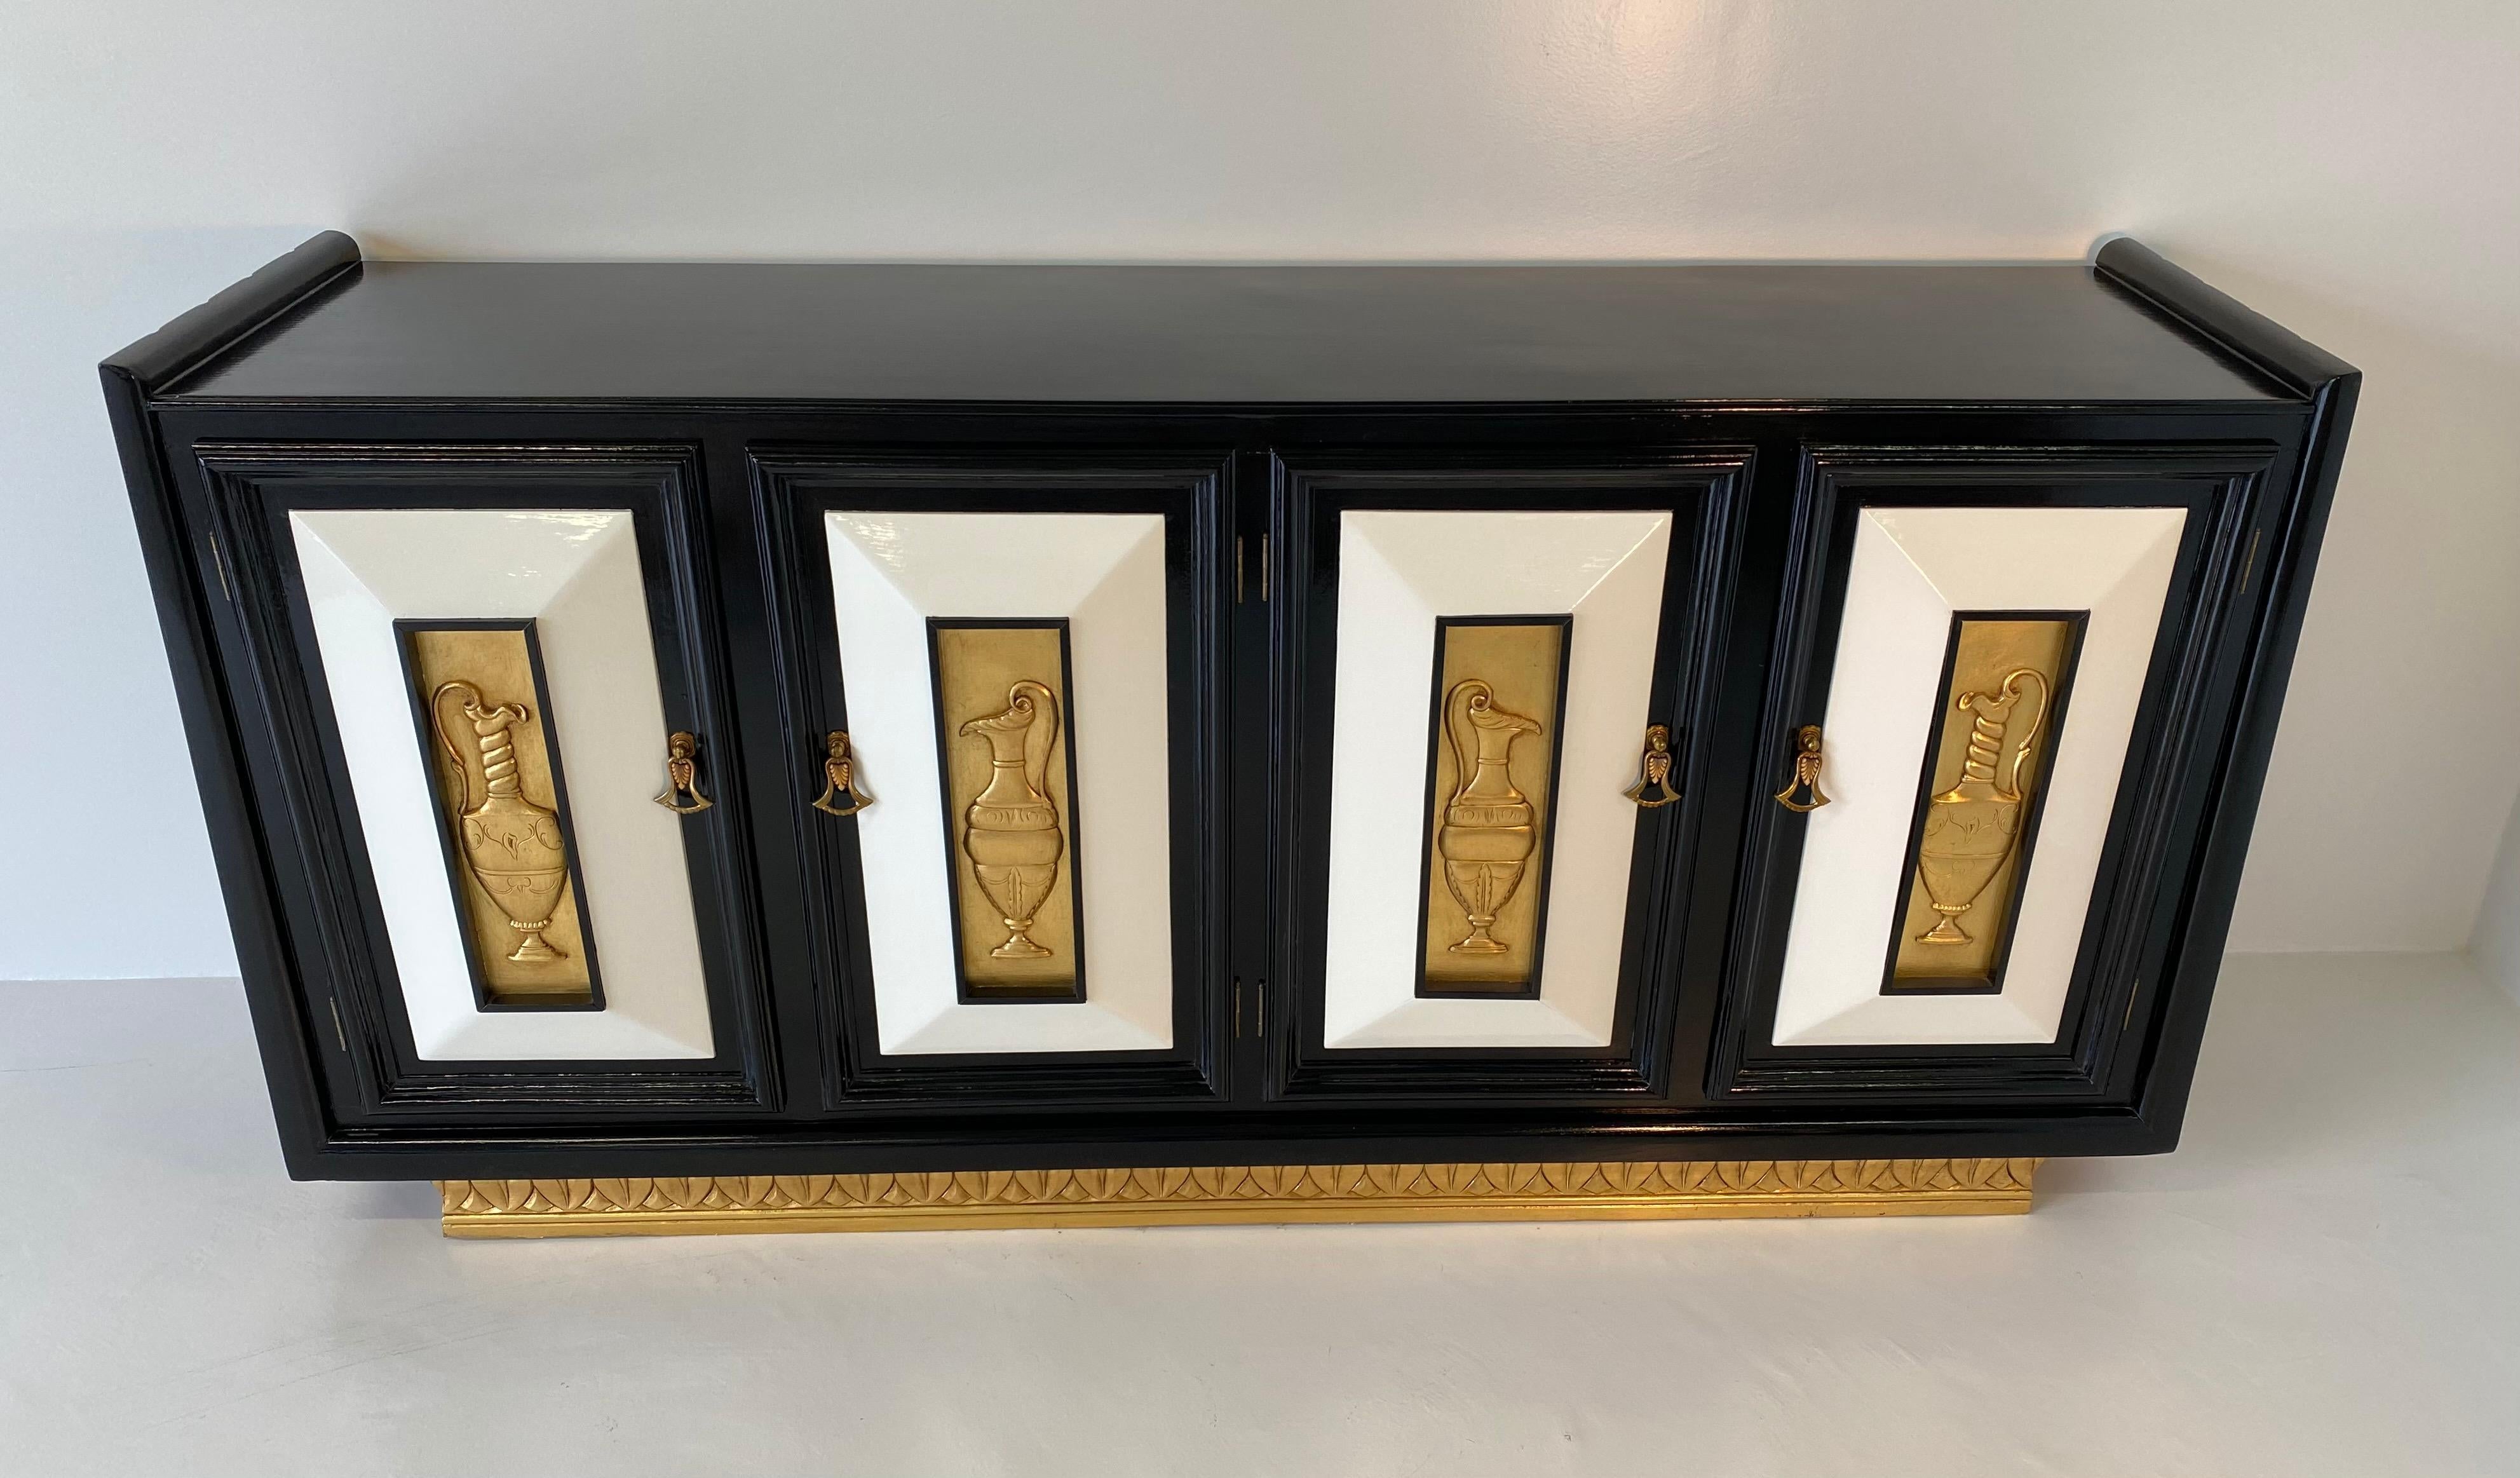 1940s Art Deco sideboard in ebonized oakwood with ivory lacquered details and gold-leafed solid wood engravings, the handles are made of brass and Bakelite.
On the inside of the four doors there are some shelves.
Completely restored.
 